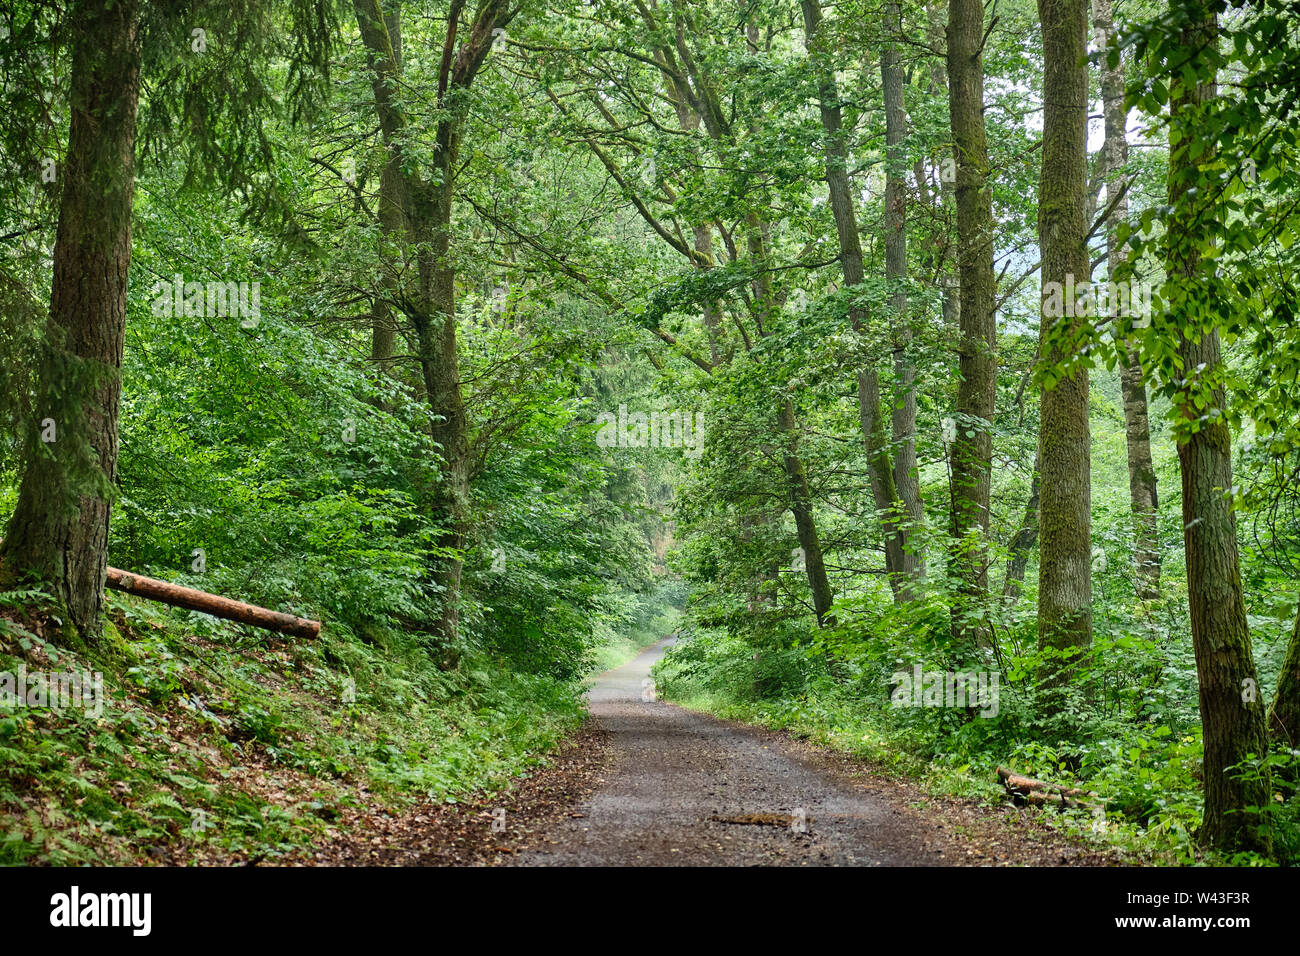 A tarred footpath and cycle path leading through a beautiful green forest with fresh lush foliage Stock Photo